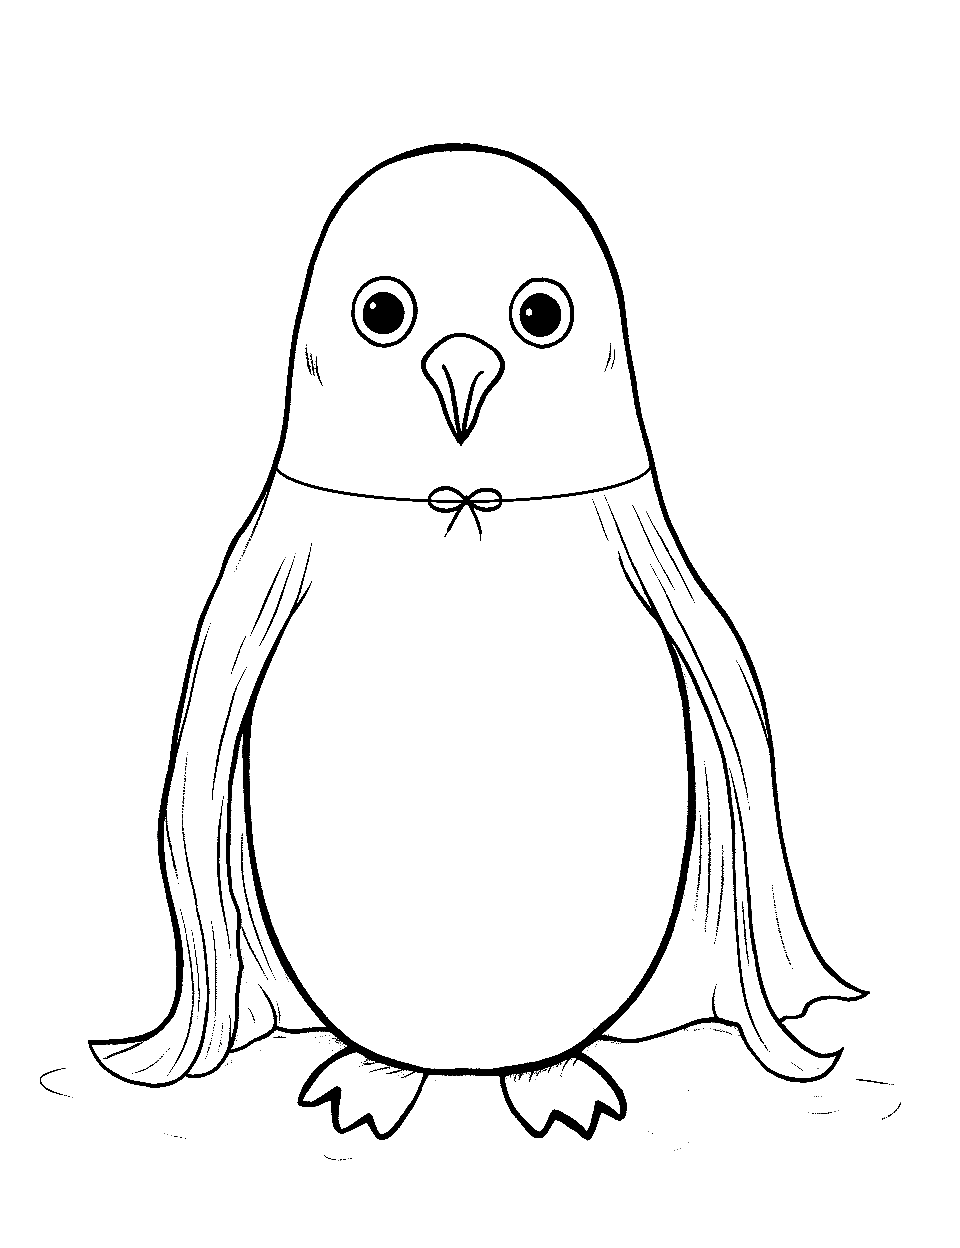 Halloween Penguin Ghost Coloring Page - A penguin draped in a white sheet, pretending to be a ghost for Halloween.